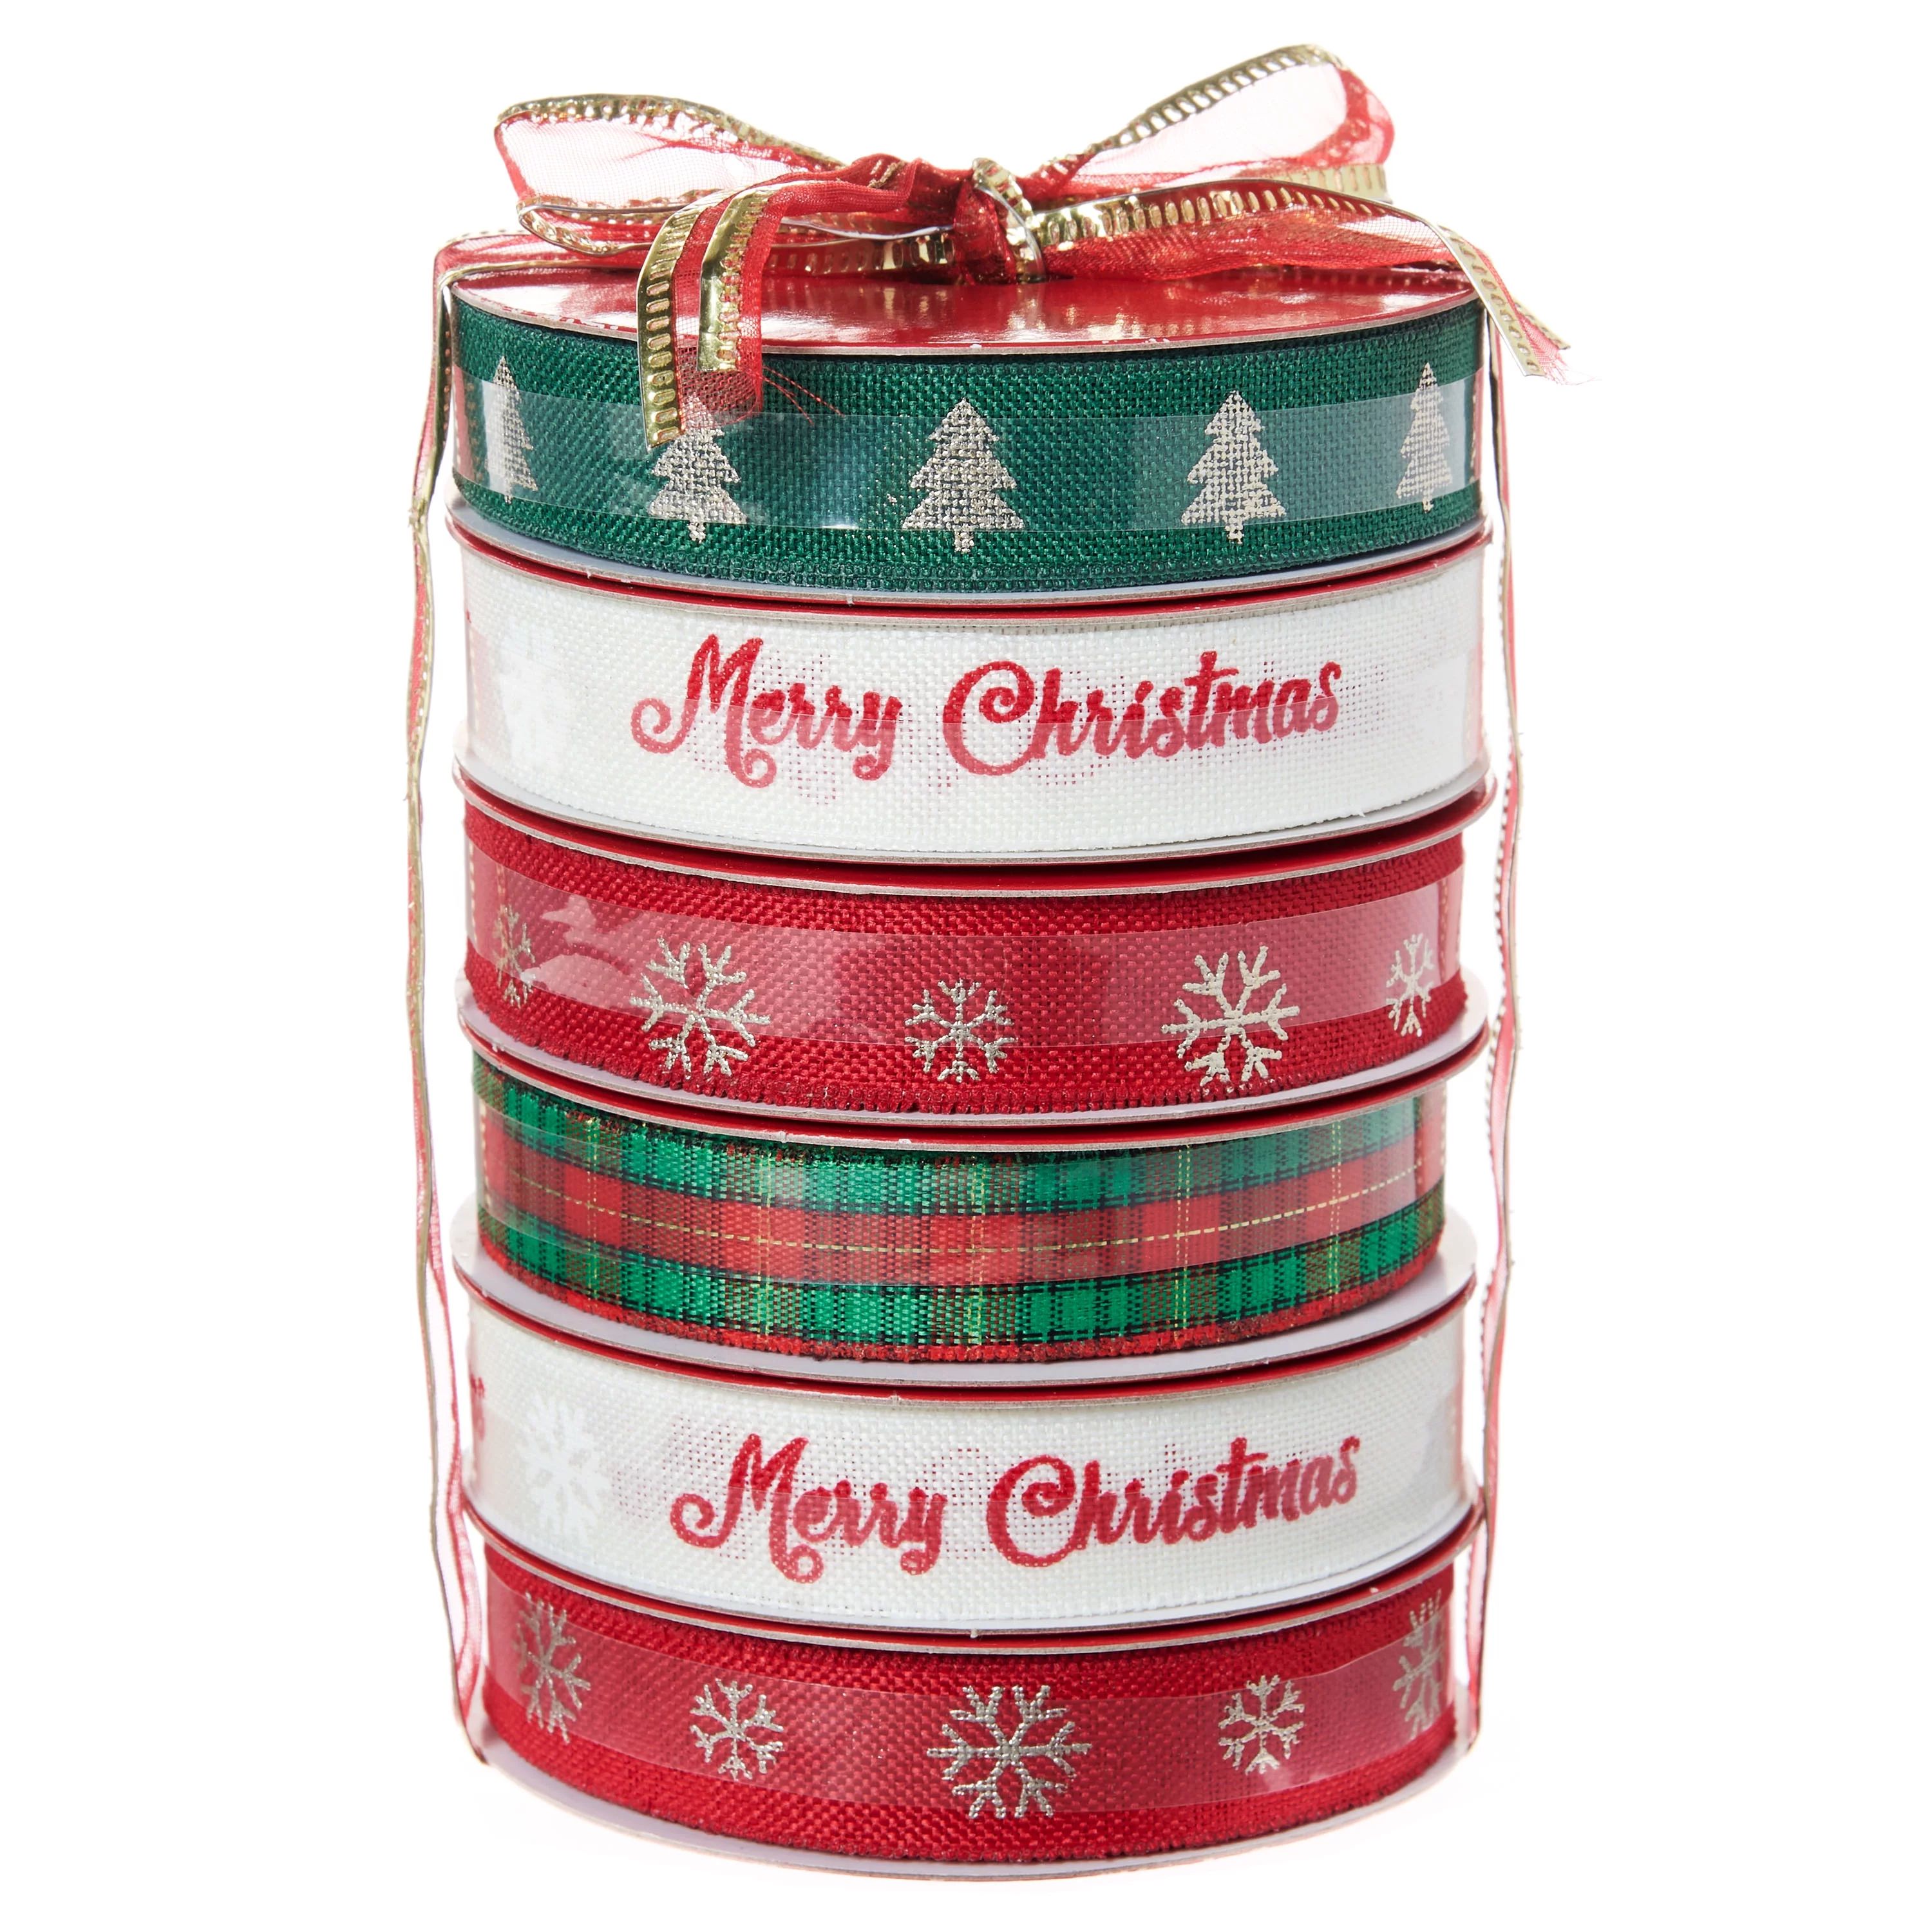 6ct - 5/8” Red, Green, White and Gold Gift Wrap Ribbon Assortment, Holiday Time 54ft Tower Rib | Walmart (US)